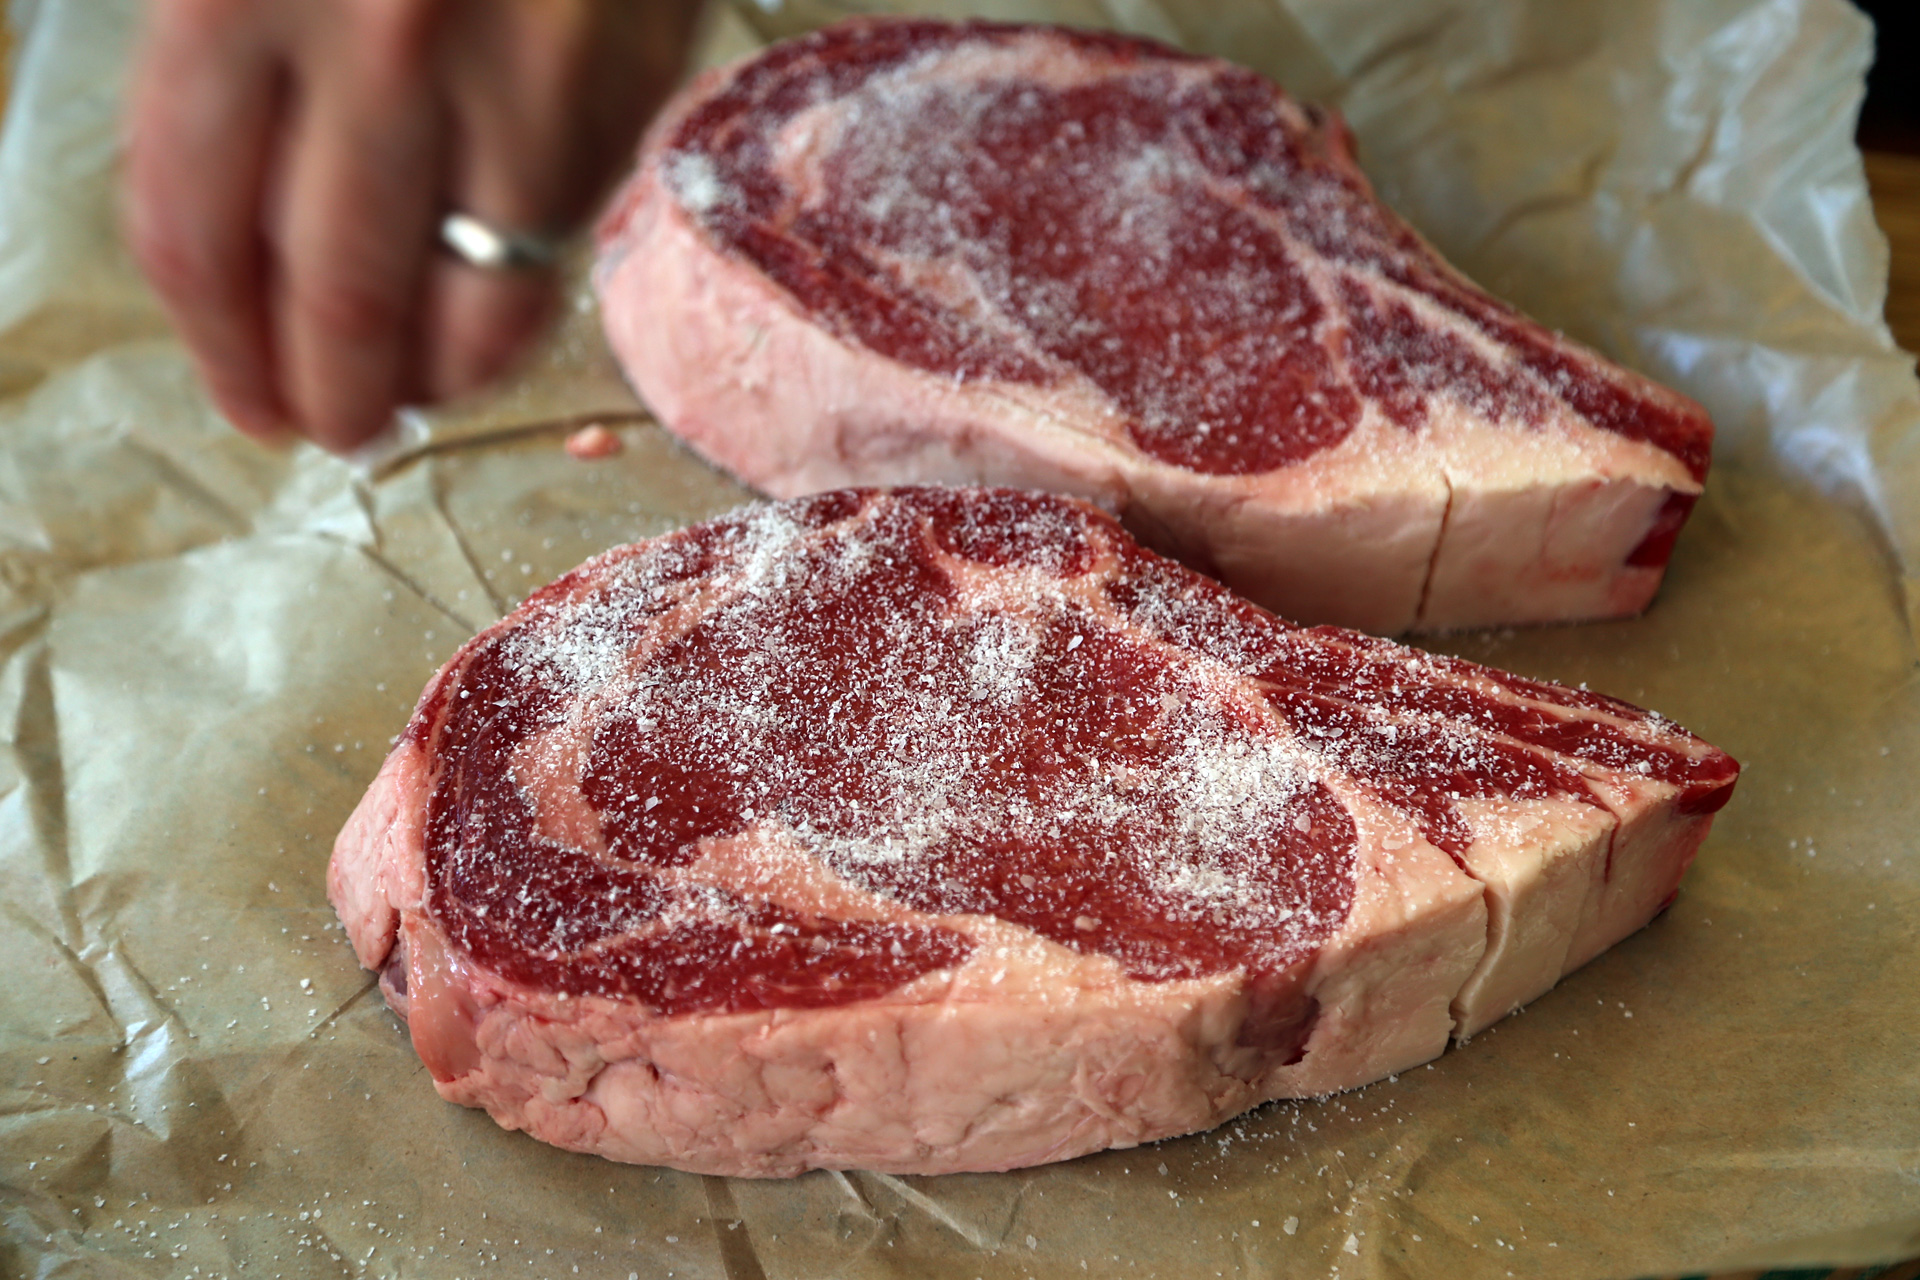 Season simply but liberally. I like to salt my steak ahead of time, at least overnight. You can also salt it and leave it out at room temperature for 45 minutes before grilling.